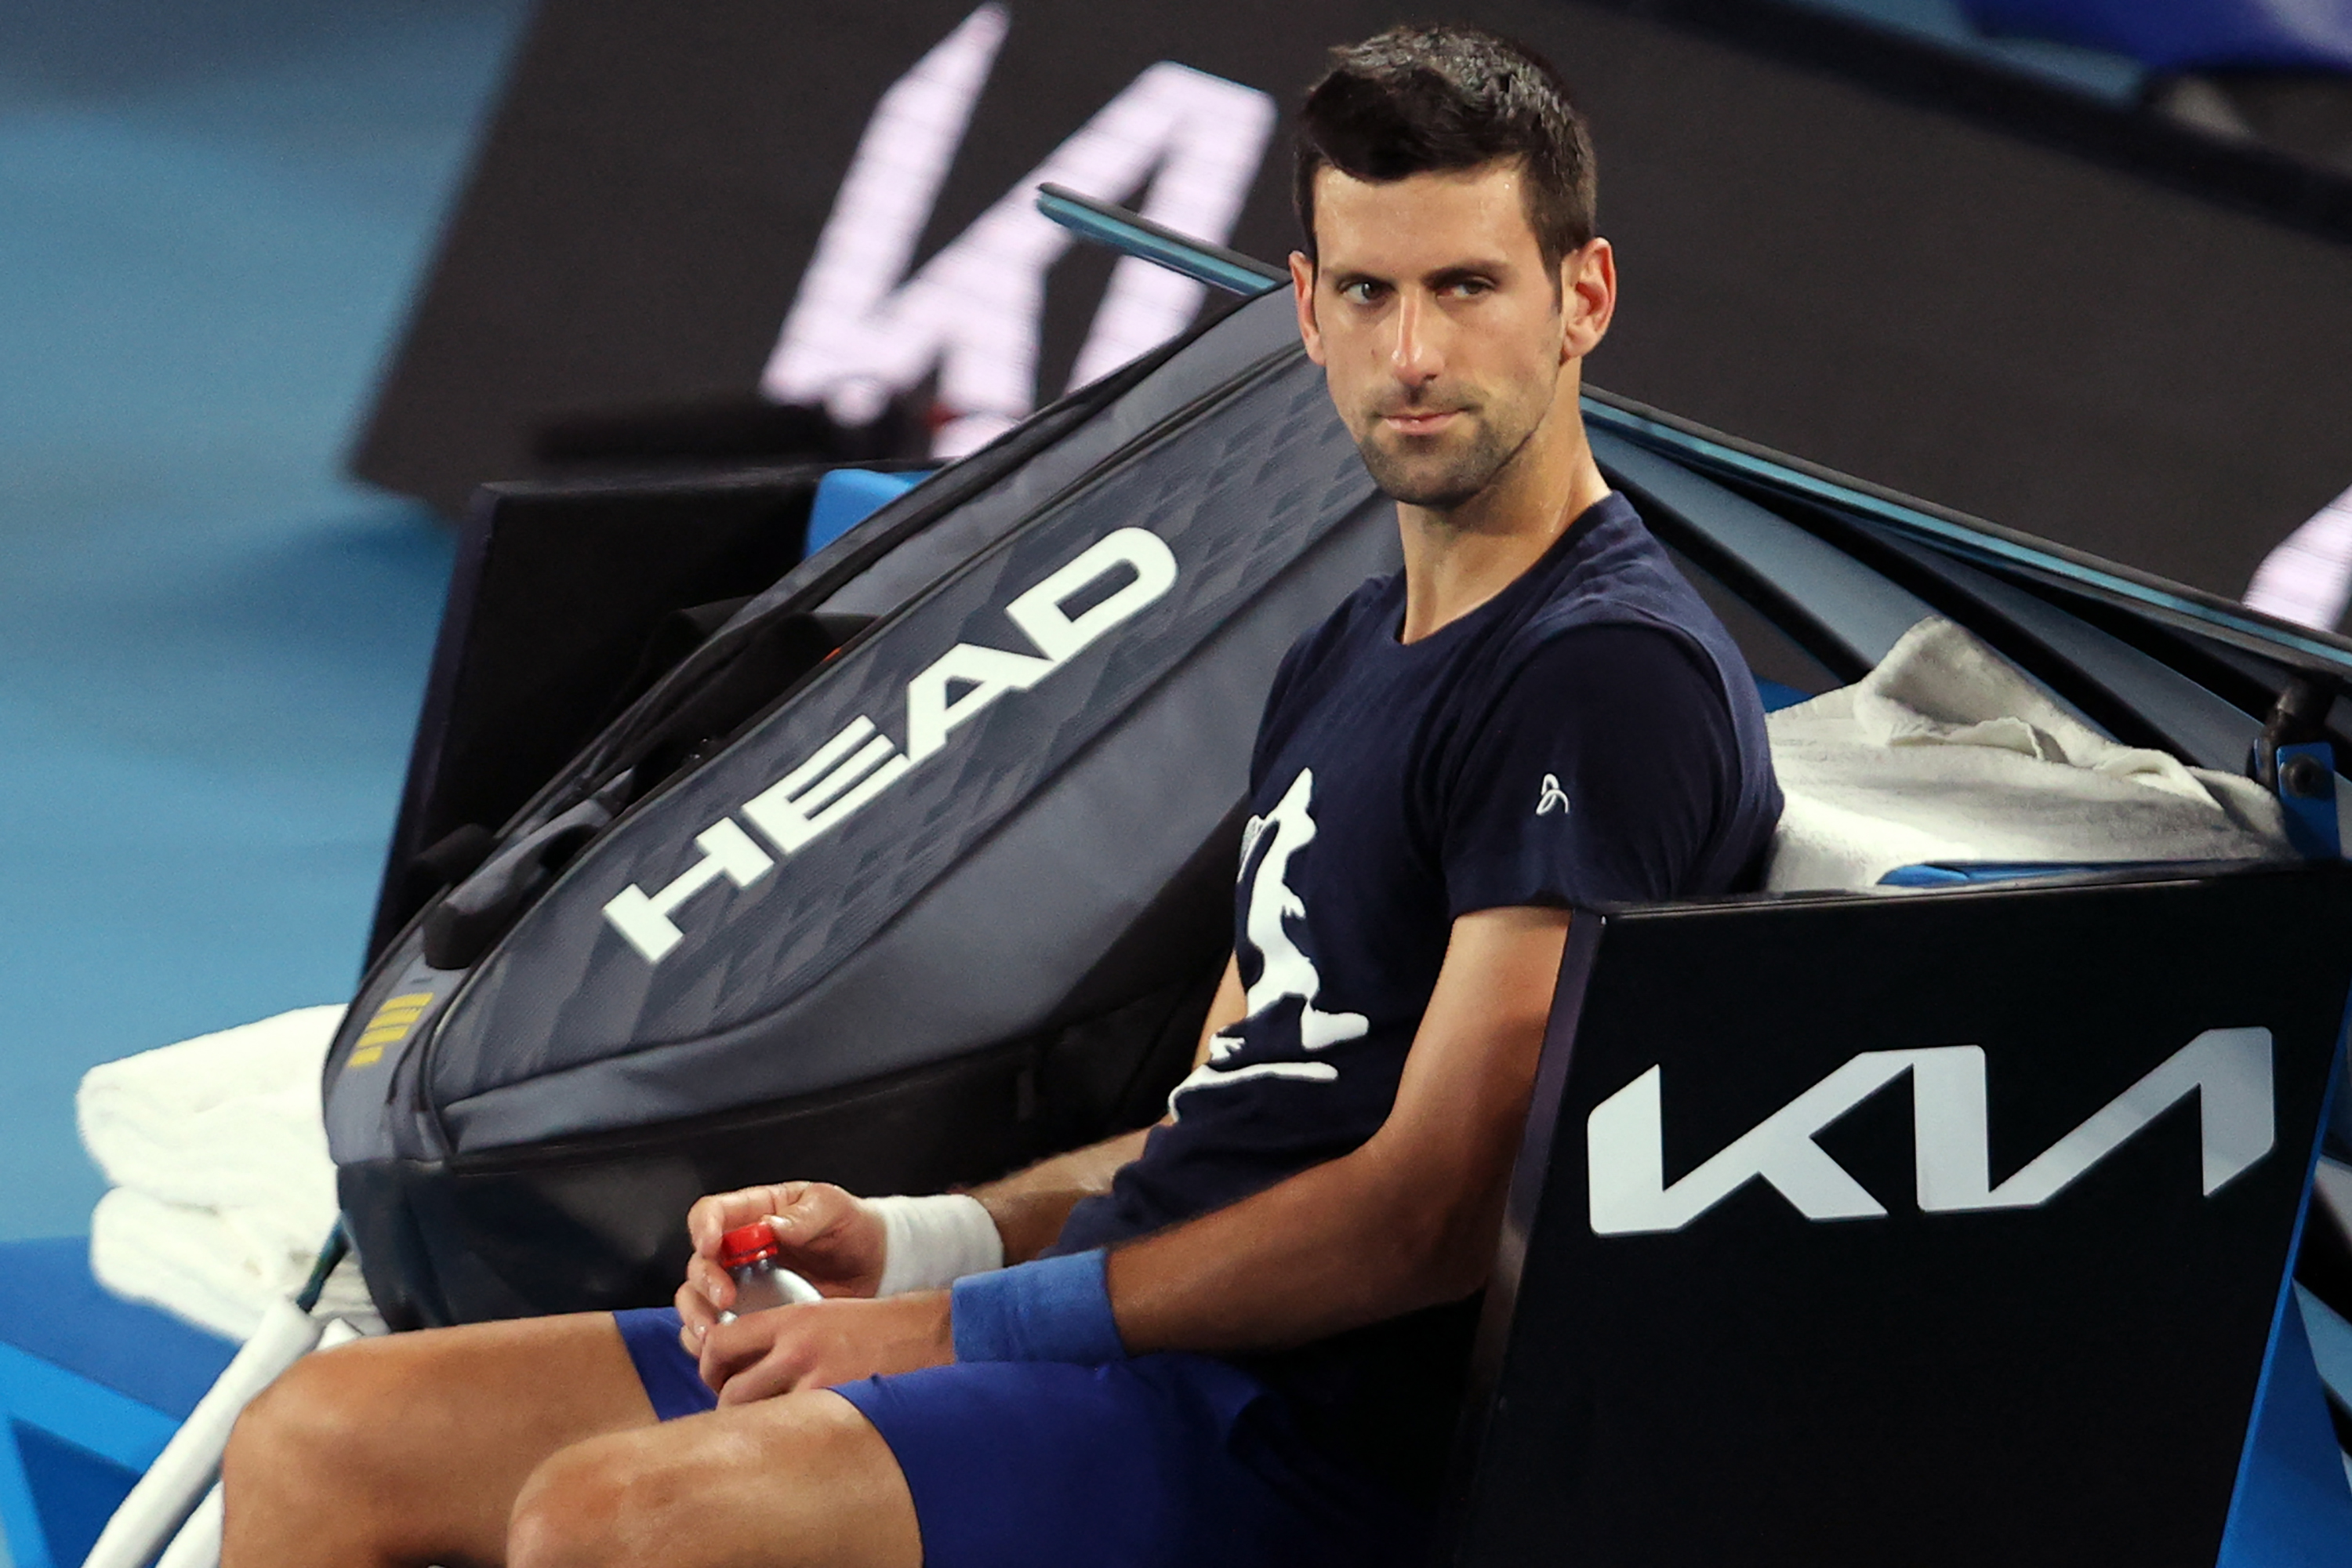 Novak Djokovic of Serbia attends a practice session ahead of the Australian Open tennis tournament in Melbourne on January 14.